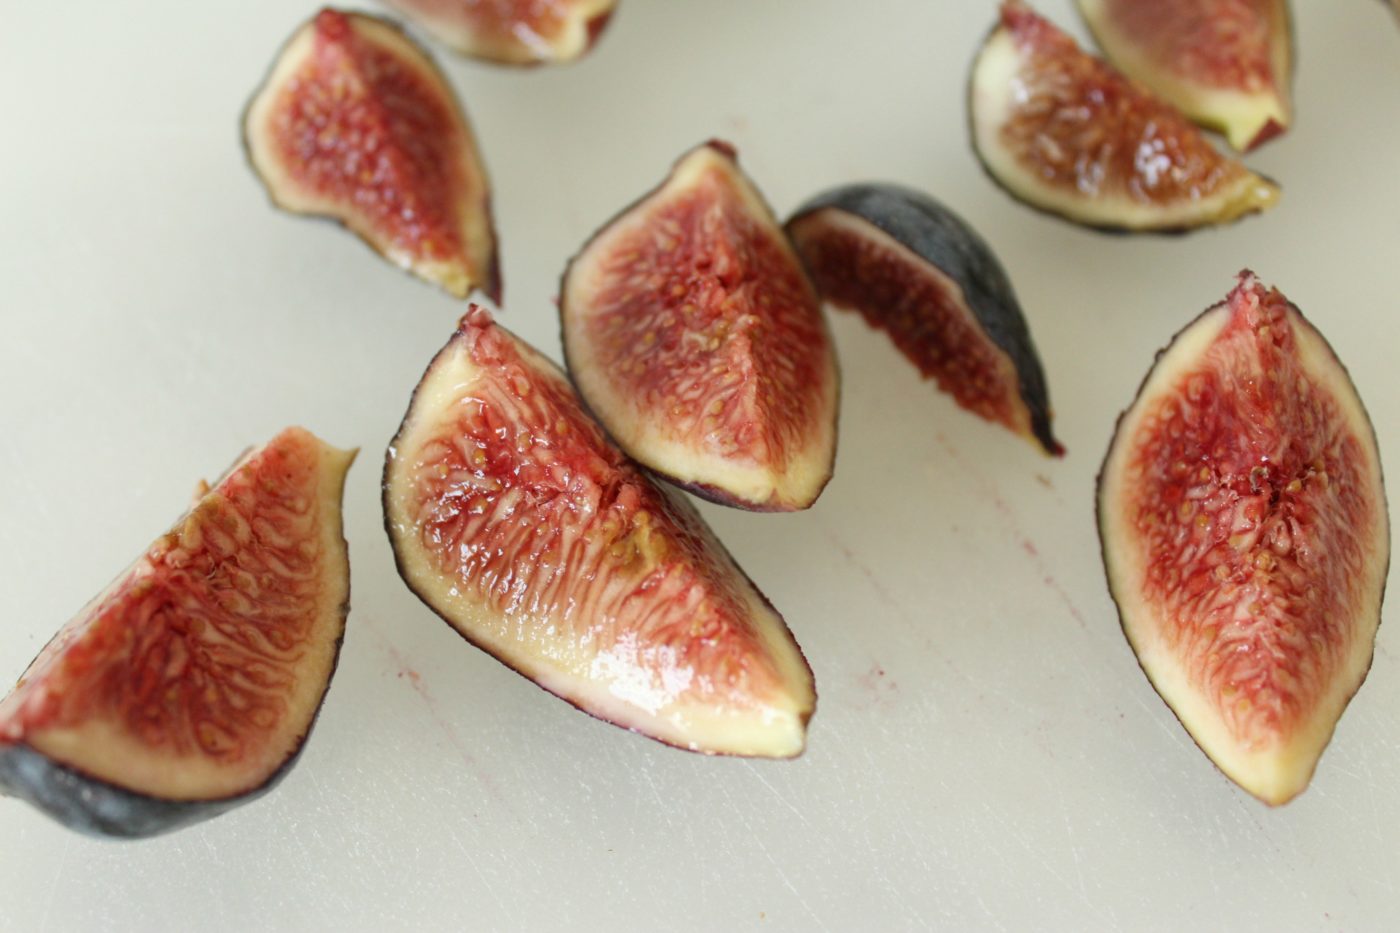 Figs are beautiful and a great addition to cocktails, pasta and salads.